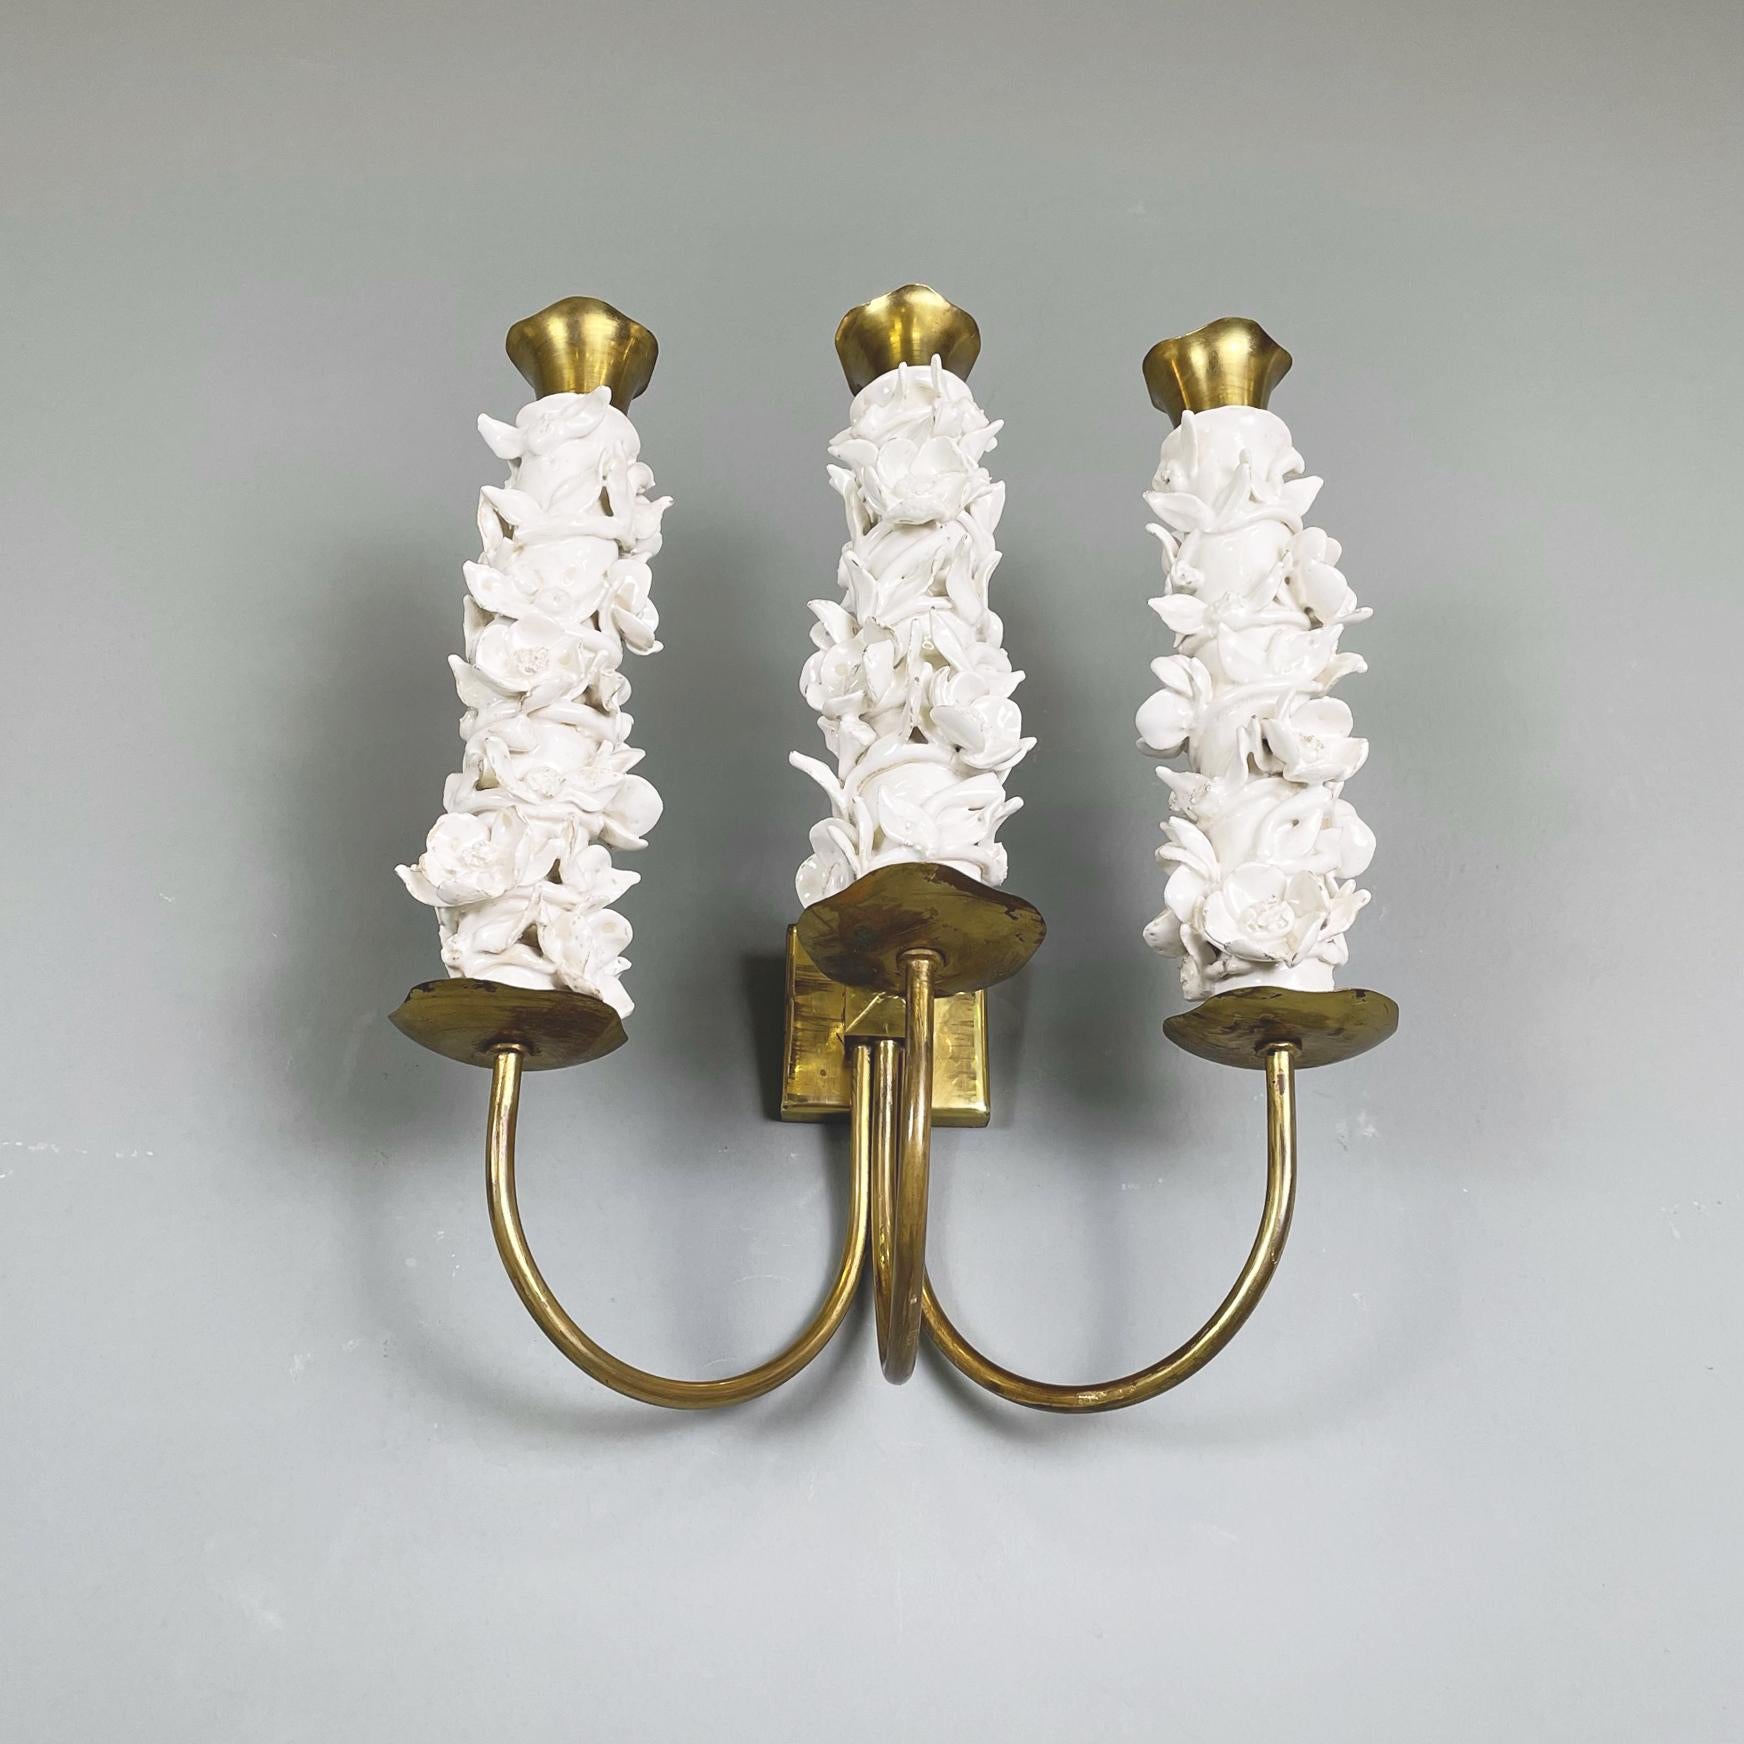 Italian Midcentury Brass White Floral Ceramic Wall Lamps by Luigi Zortea, 1949 In Good Condition For Sale In MIlano, IT